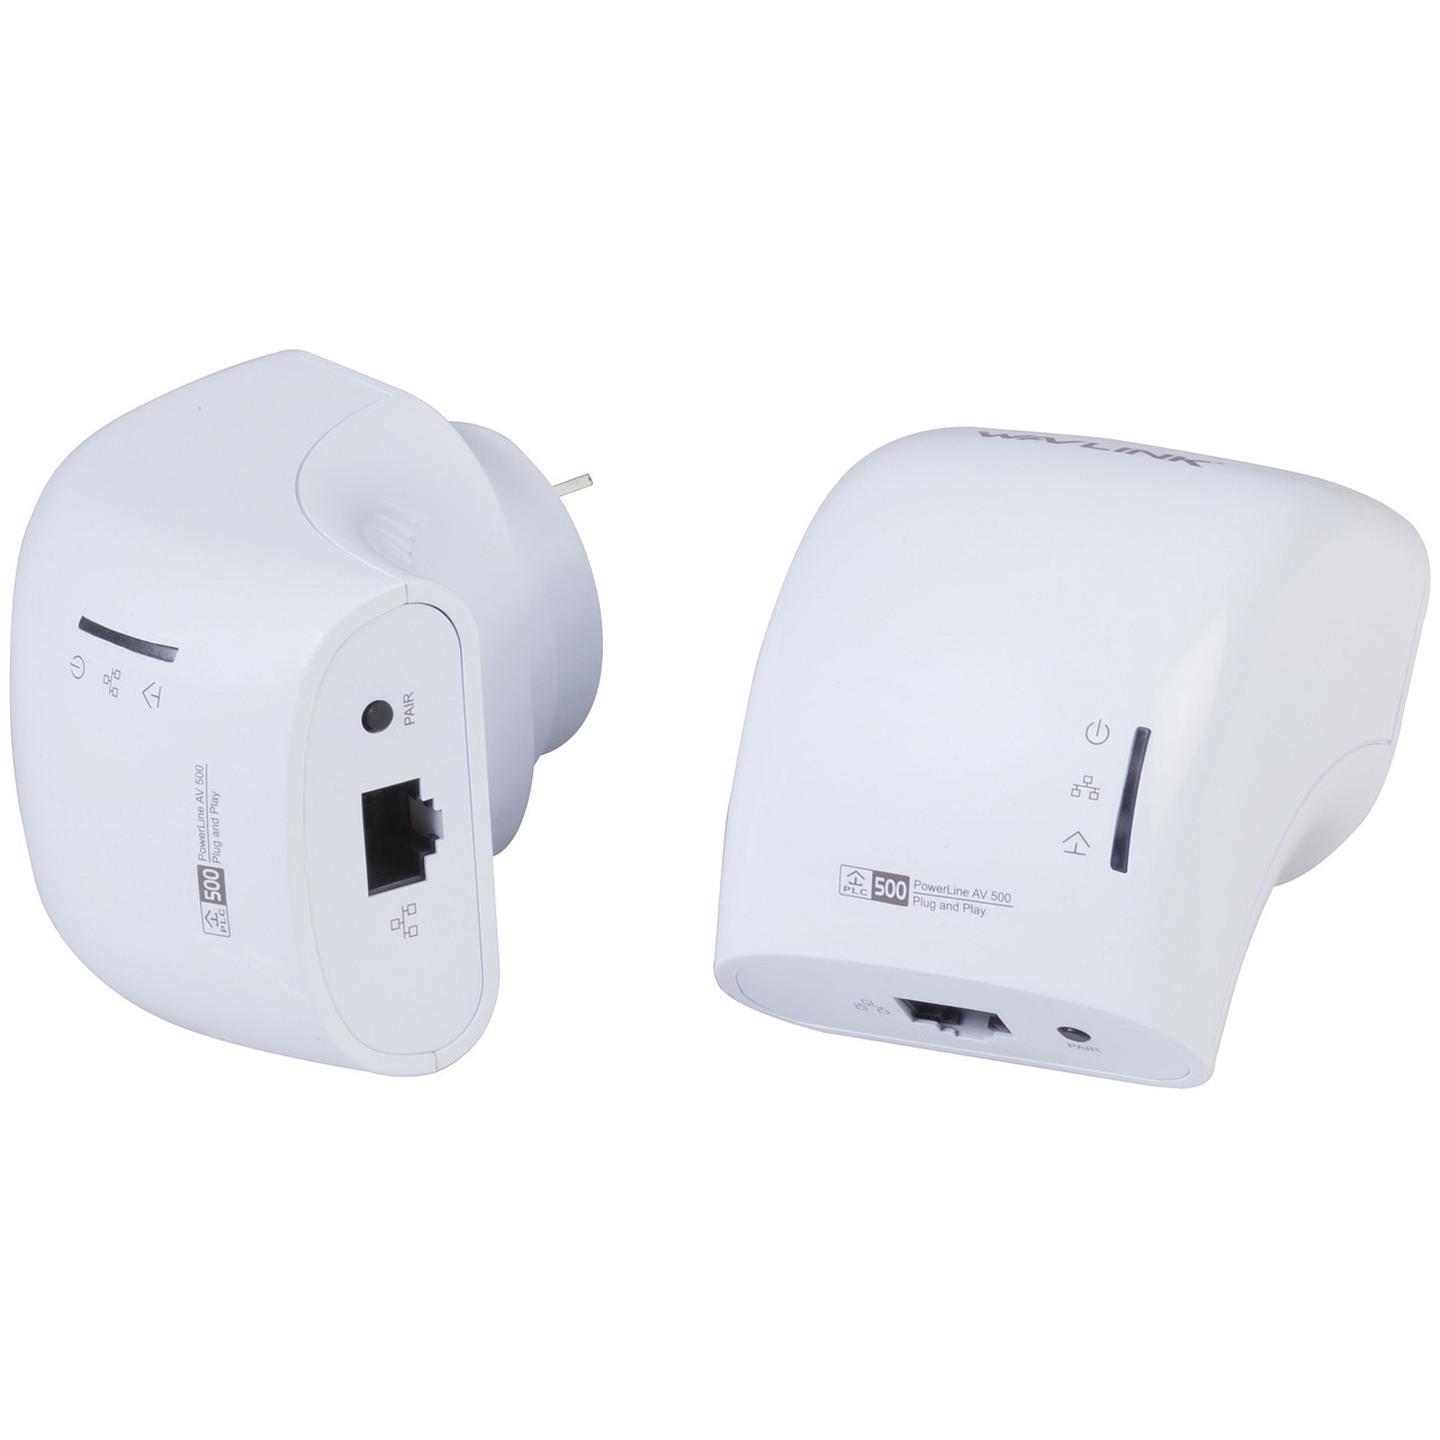 Ethernet Over Power N300 Wi-Fi Access Point